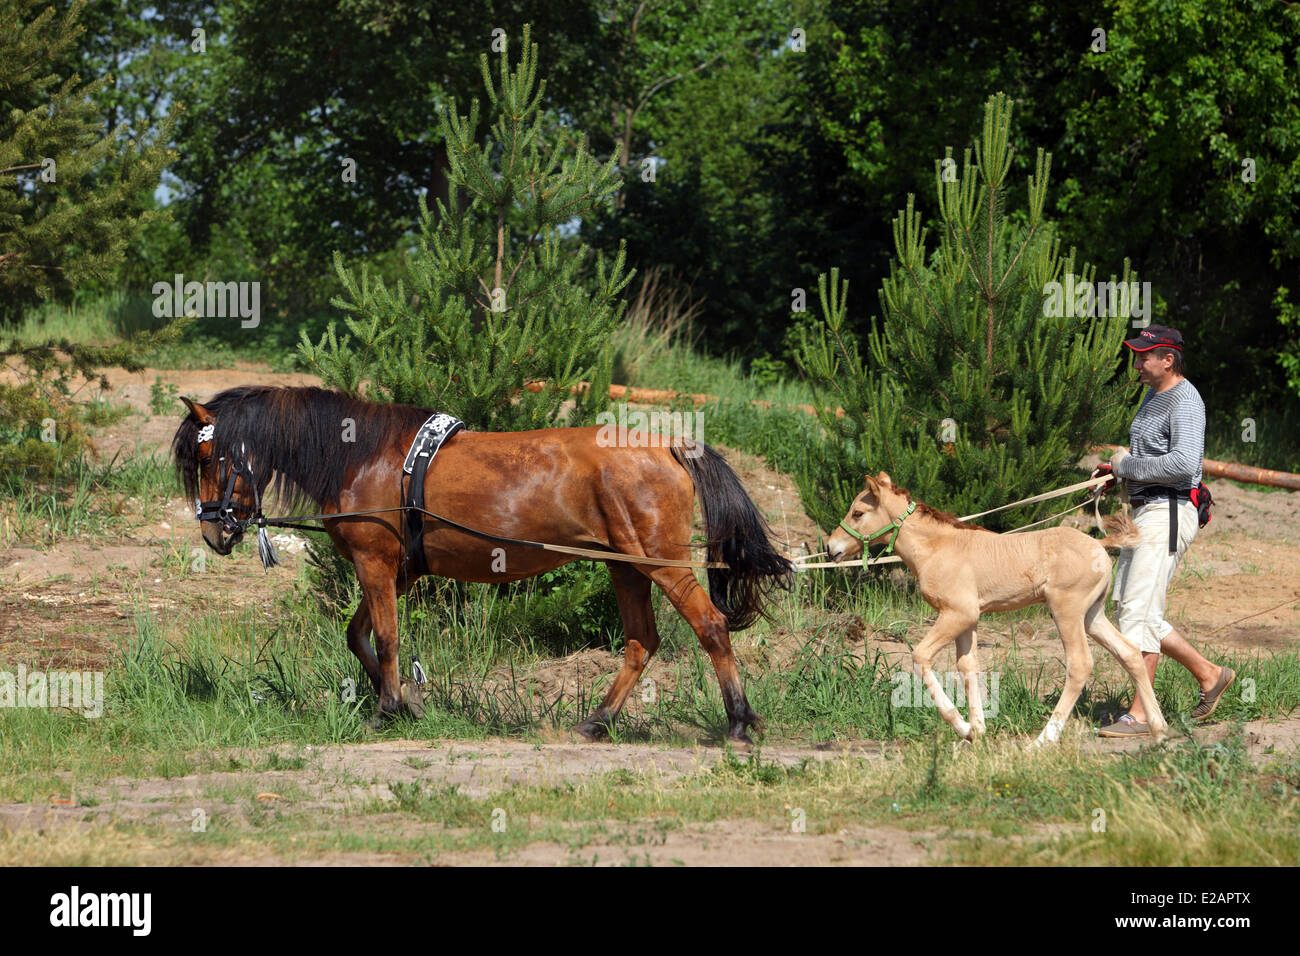 Training with reins in hand on control of young harness vyatka horse for Russian troika. Stock Photo